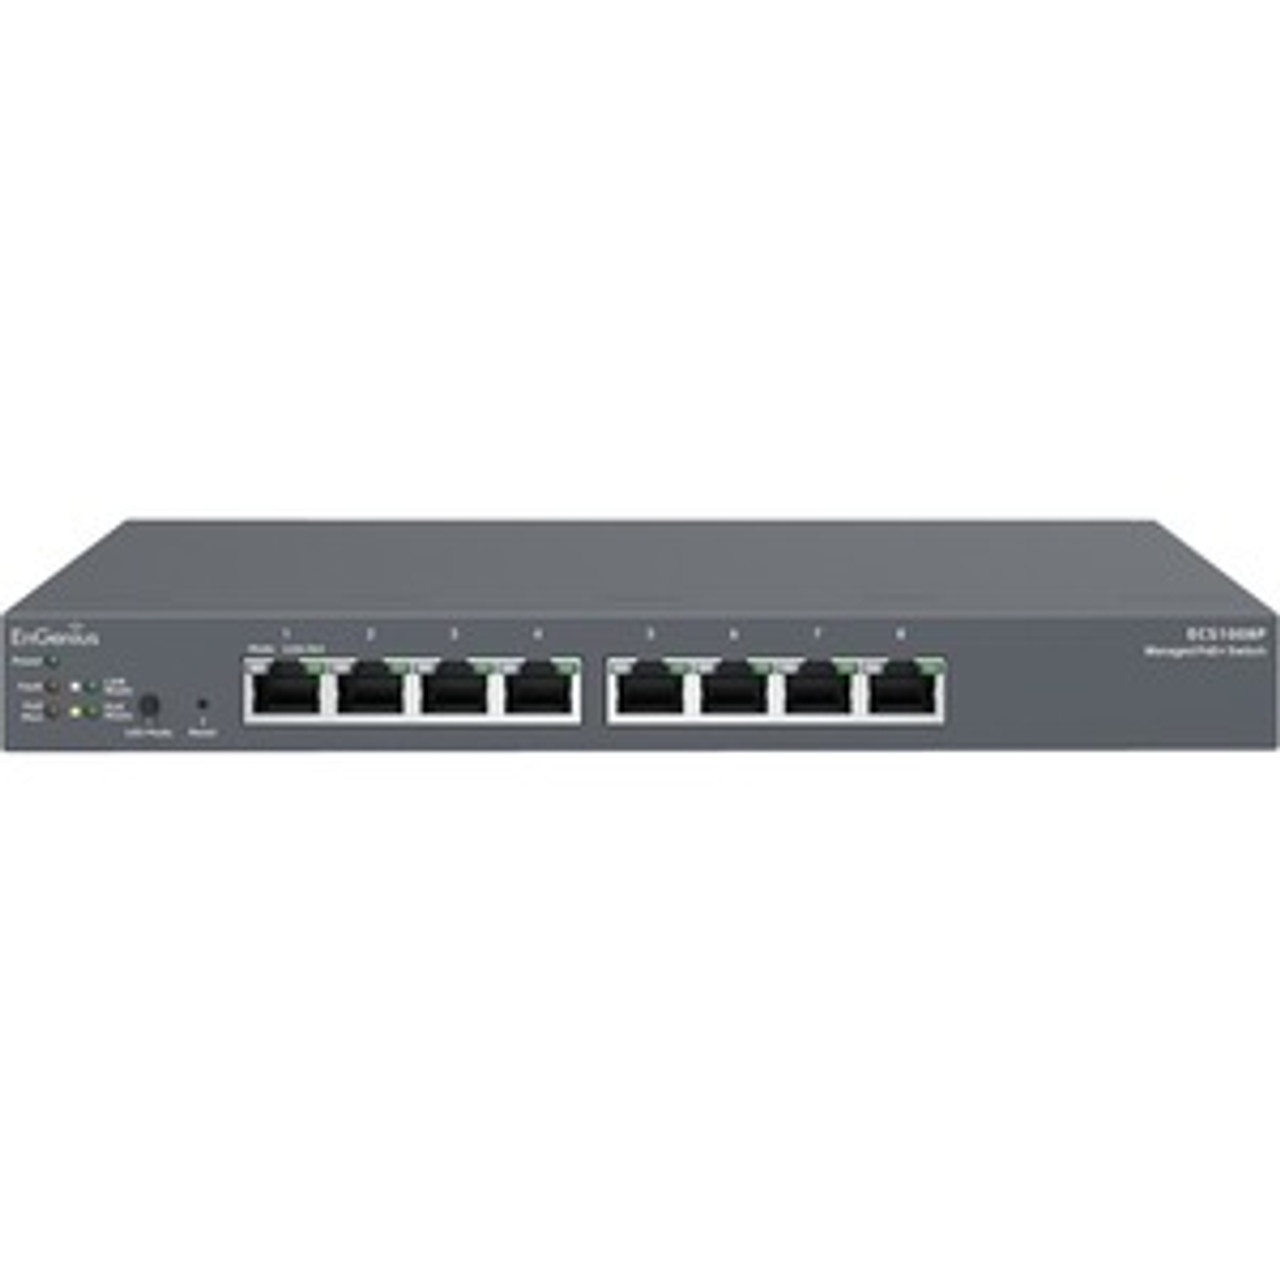 ECS1008P EnGenius Cloud Managed 55W PoE 8 Port Network Switch - 8 Ports - Manageable - 3 Layer Supported - Twisted Pair - Wall Mountable, Desktop - 2 Year